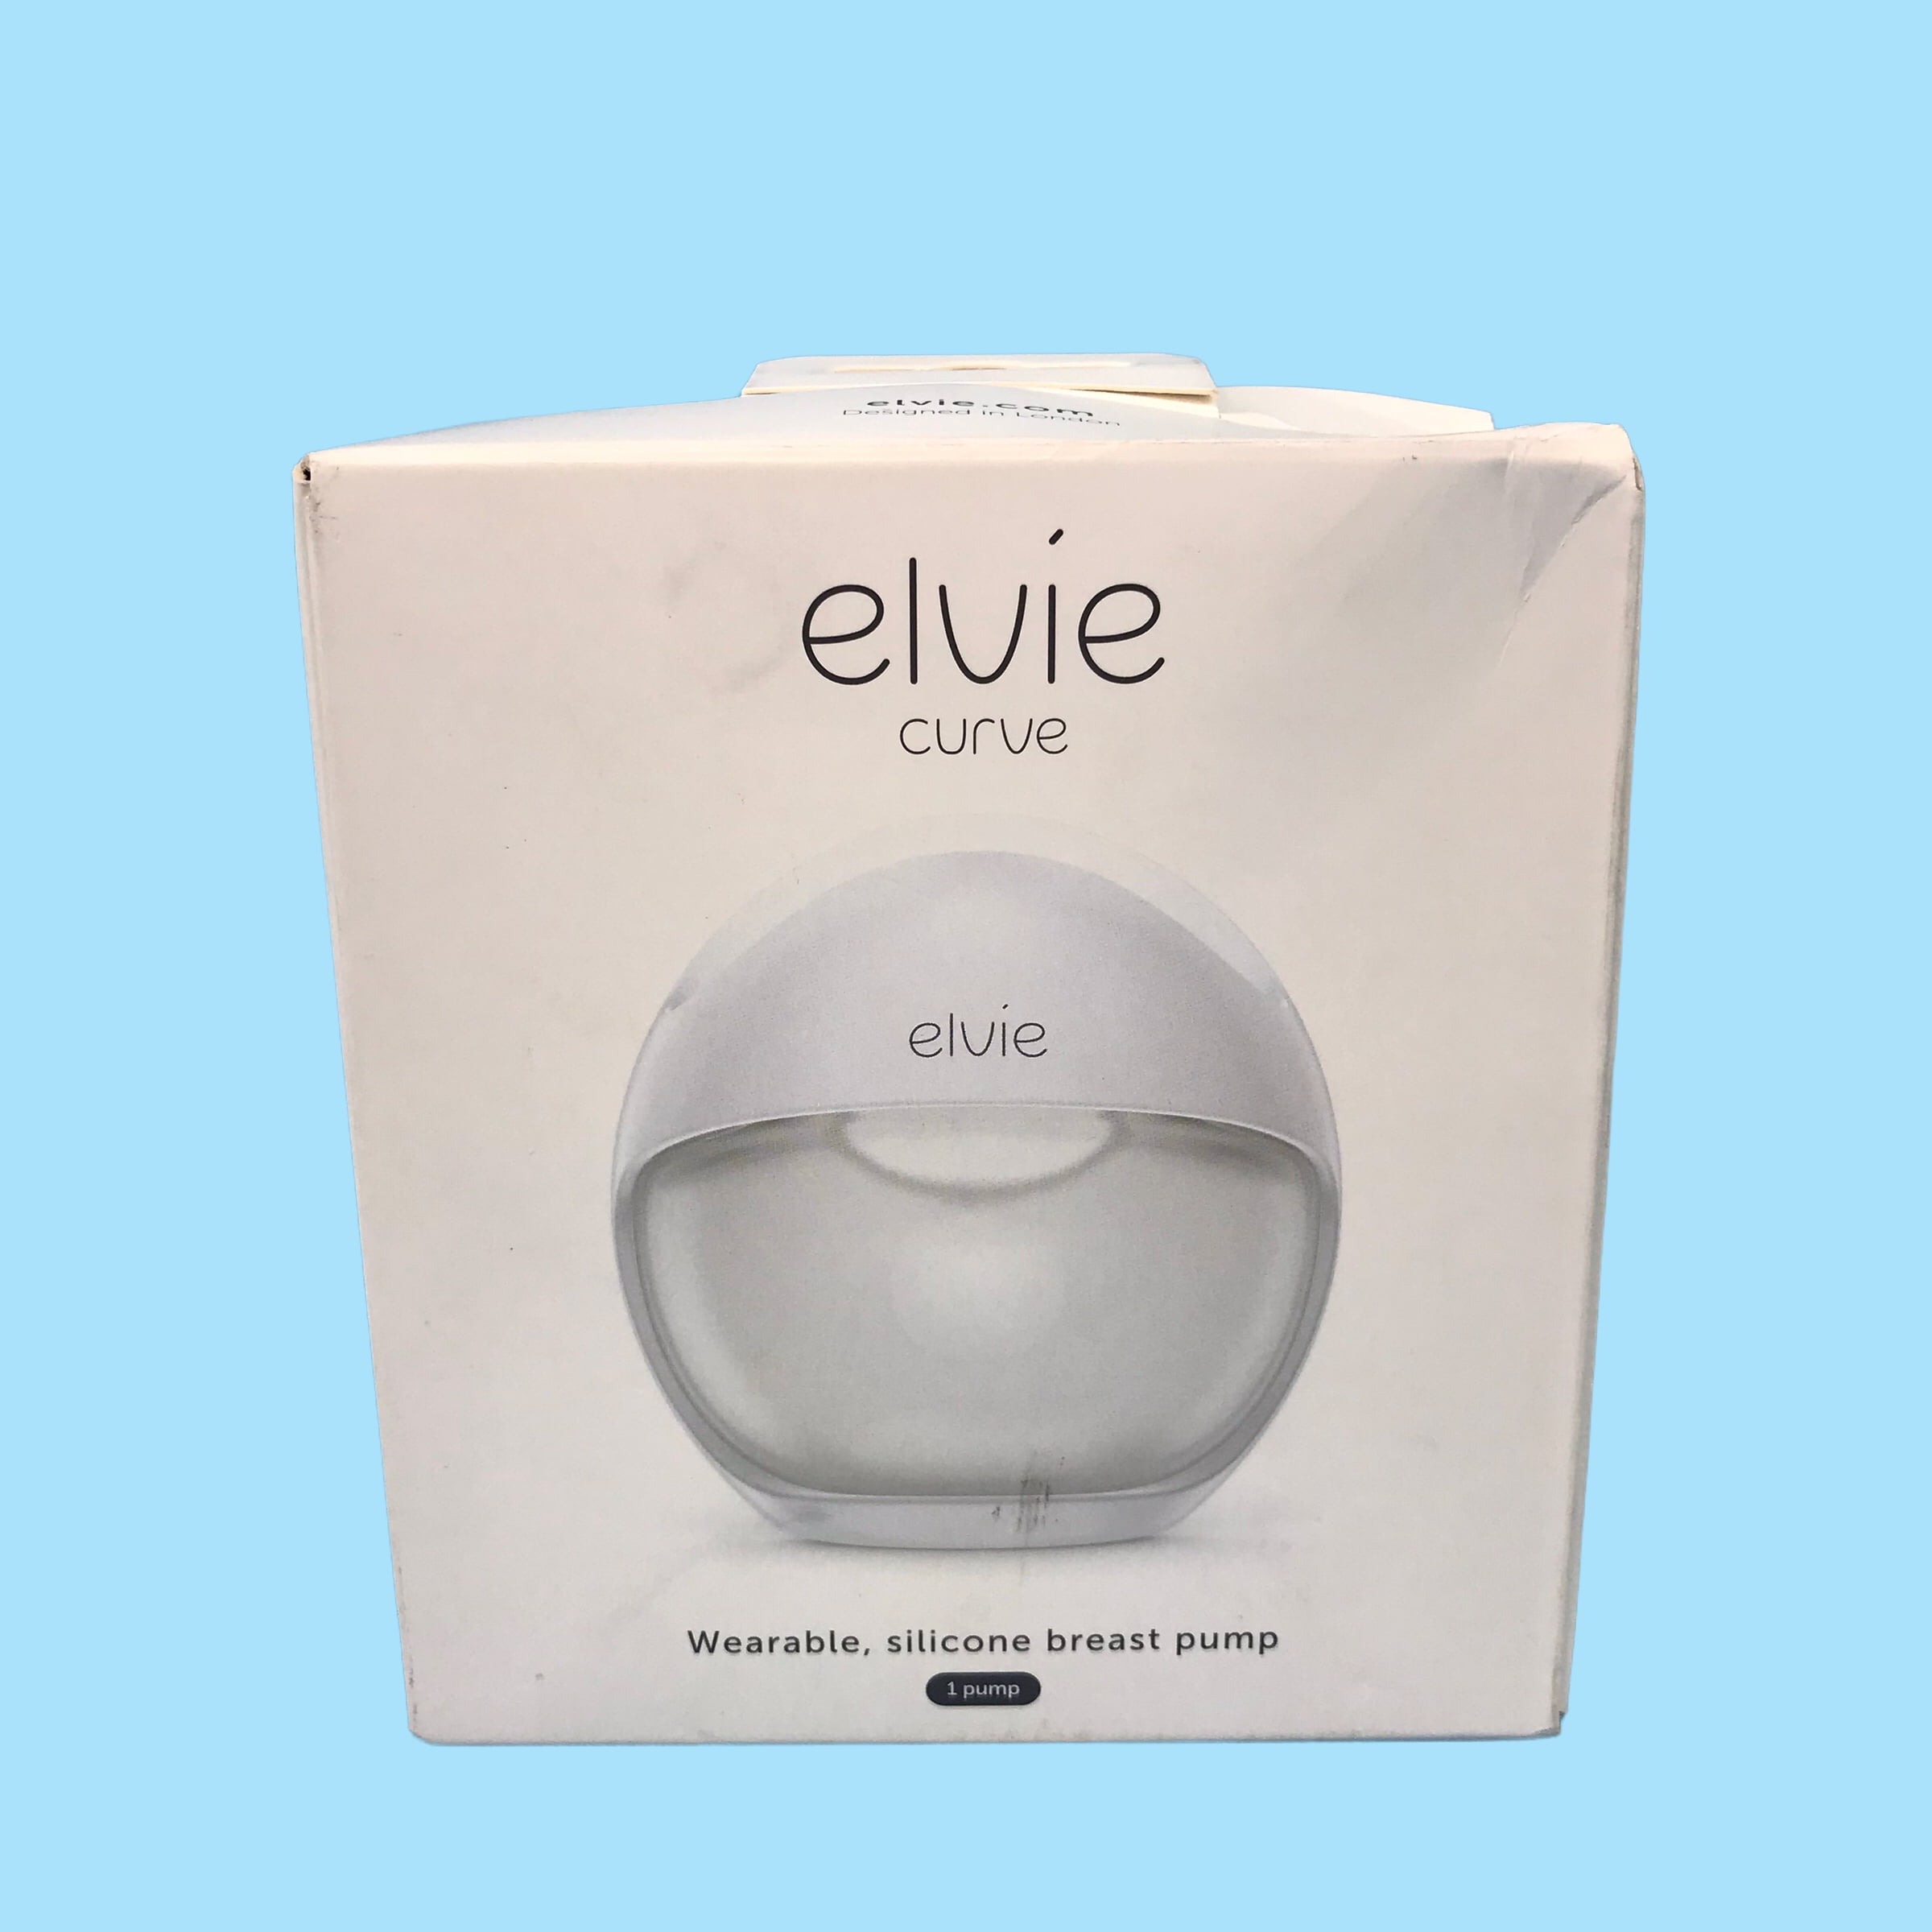 NEW SEALED Elvie Curve Wearable Breast Pump - White 1 Count (Pack